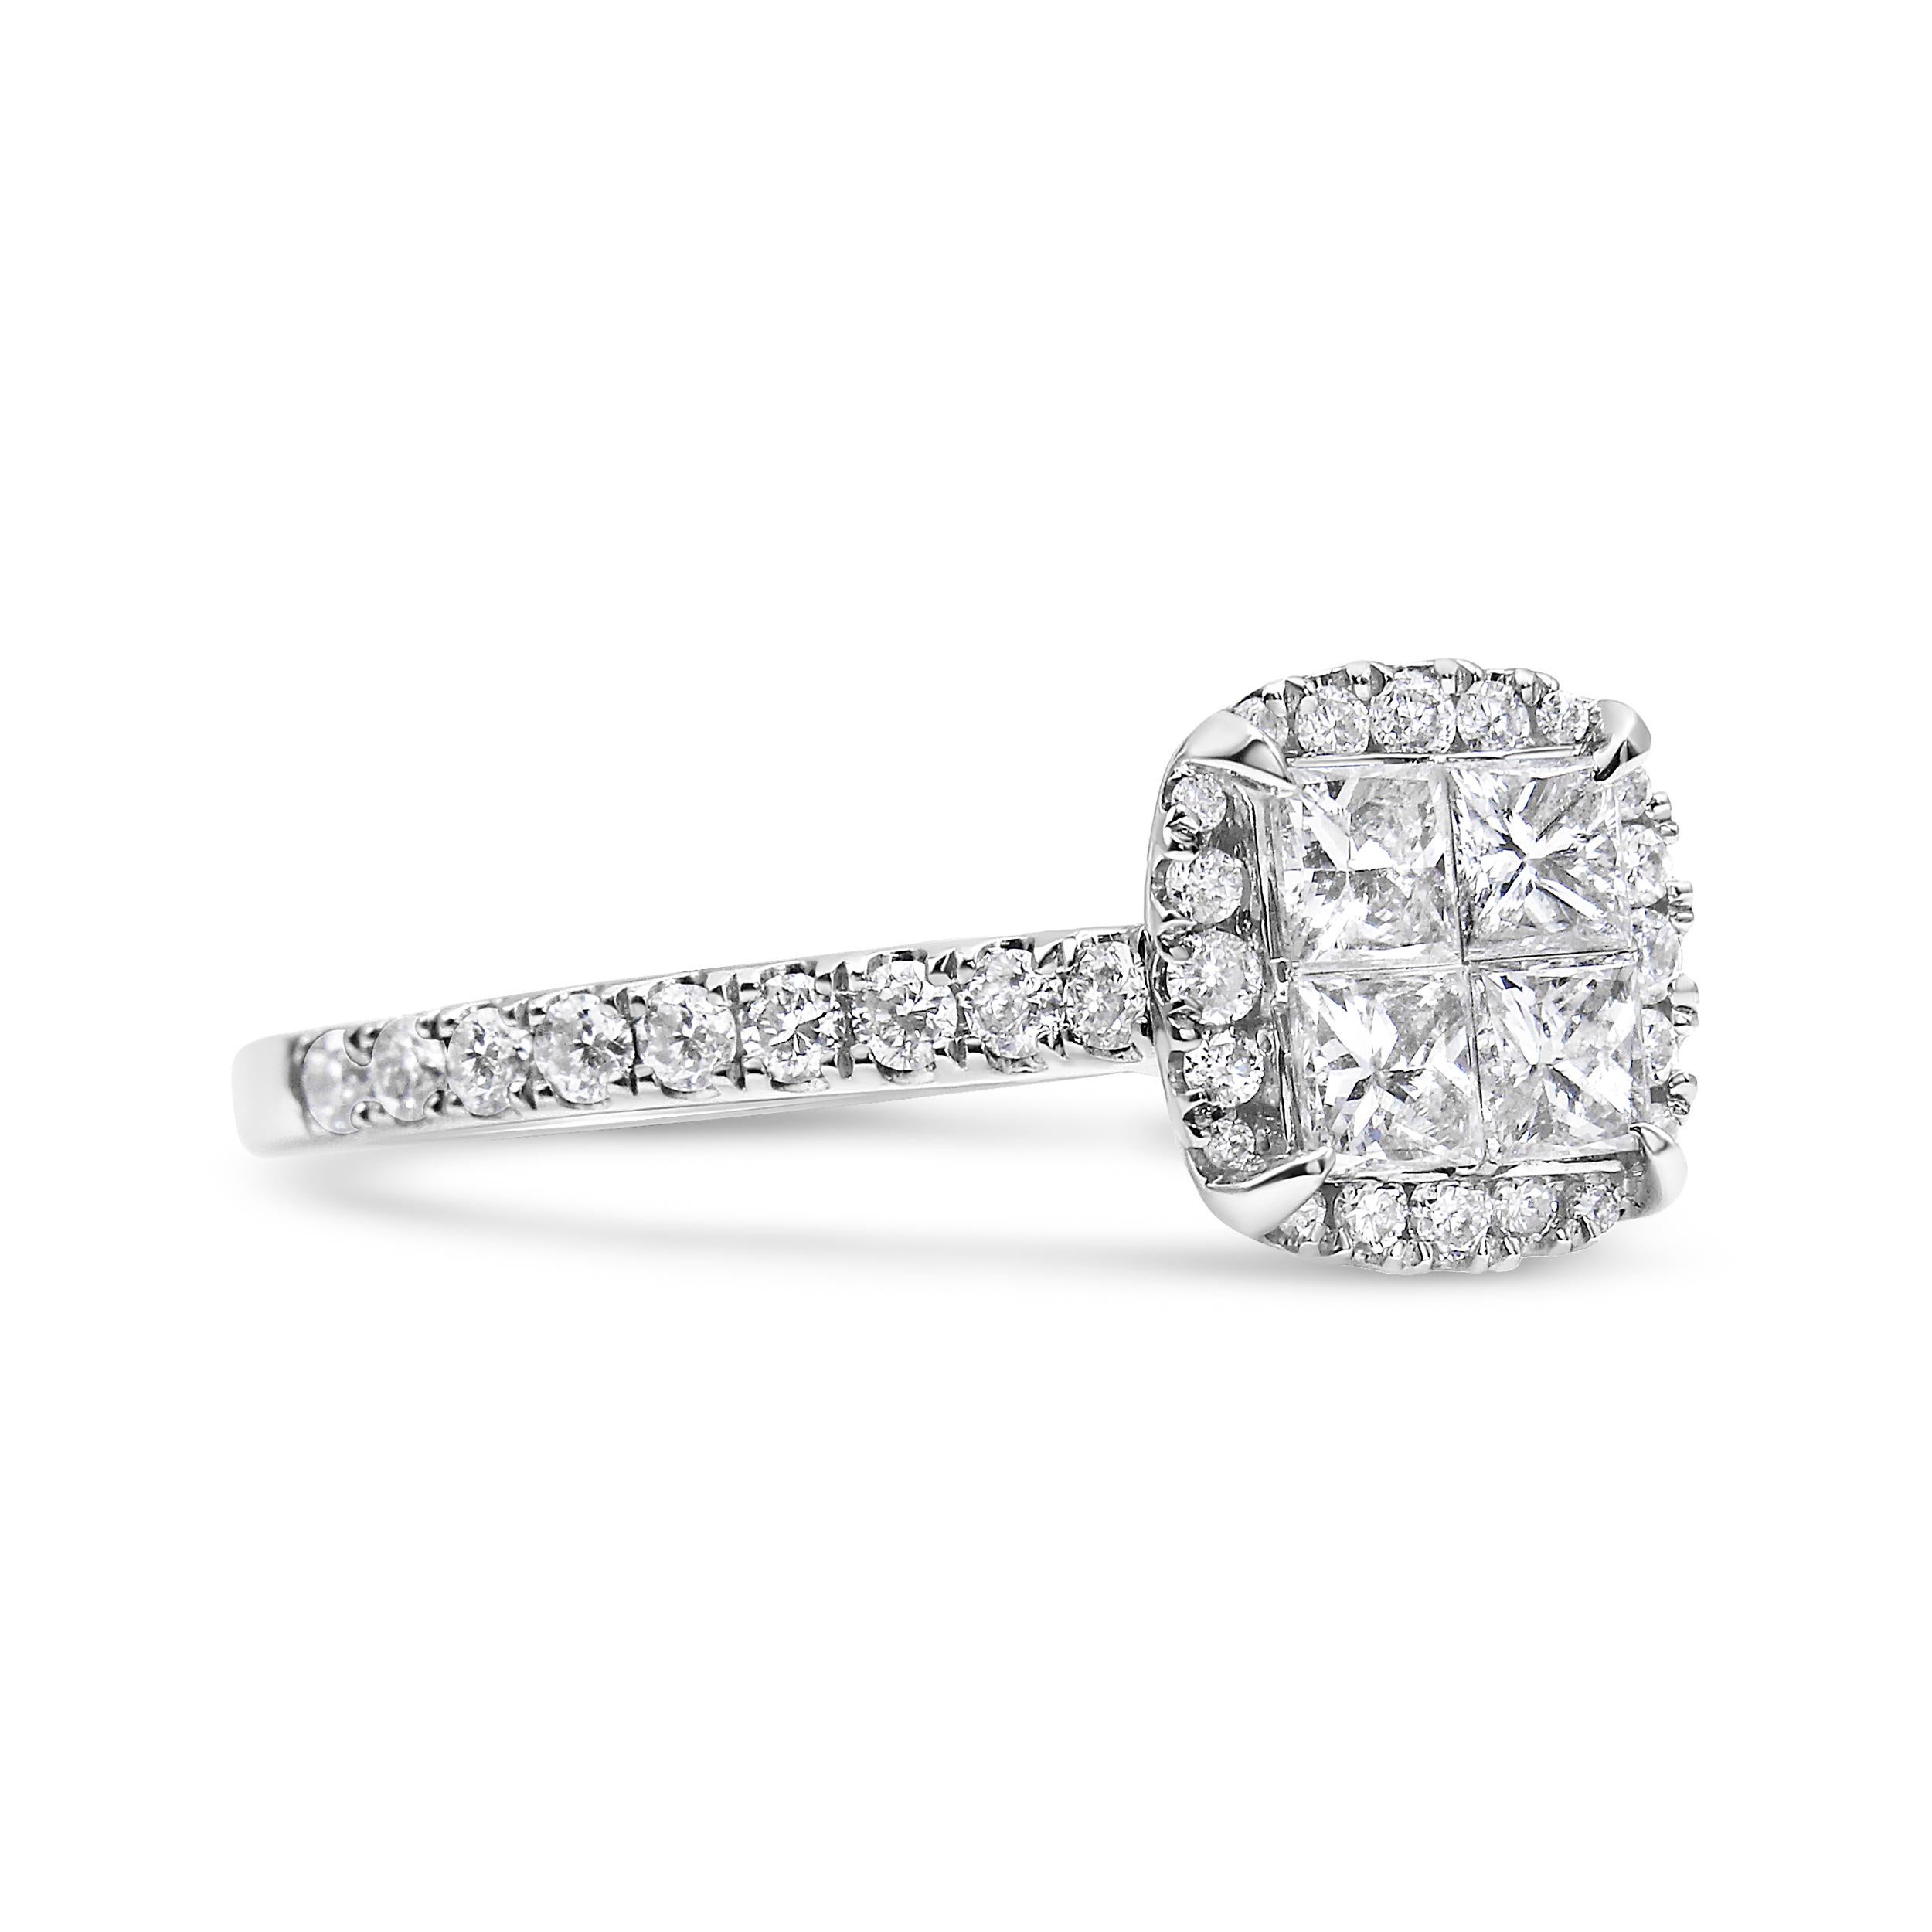 Commit to a lifetime of love and happiness with this gorgeous 1.0 c.t. diamond engagement ring! This everlasting beauty is crafted in genuine 14k white gold, a metal that will stay tarnish free for decades to come. The central diamond cluster is